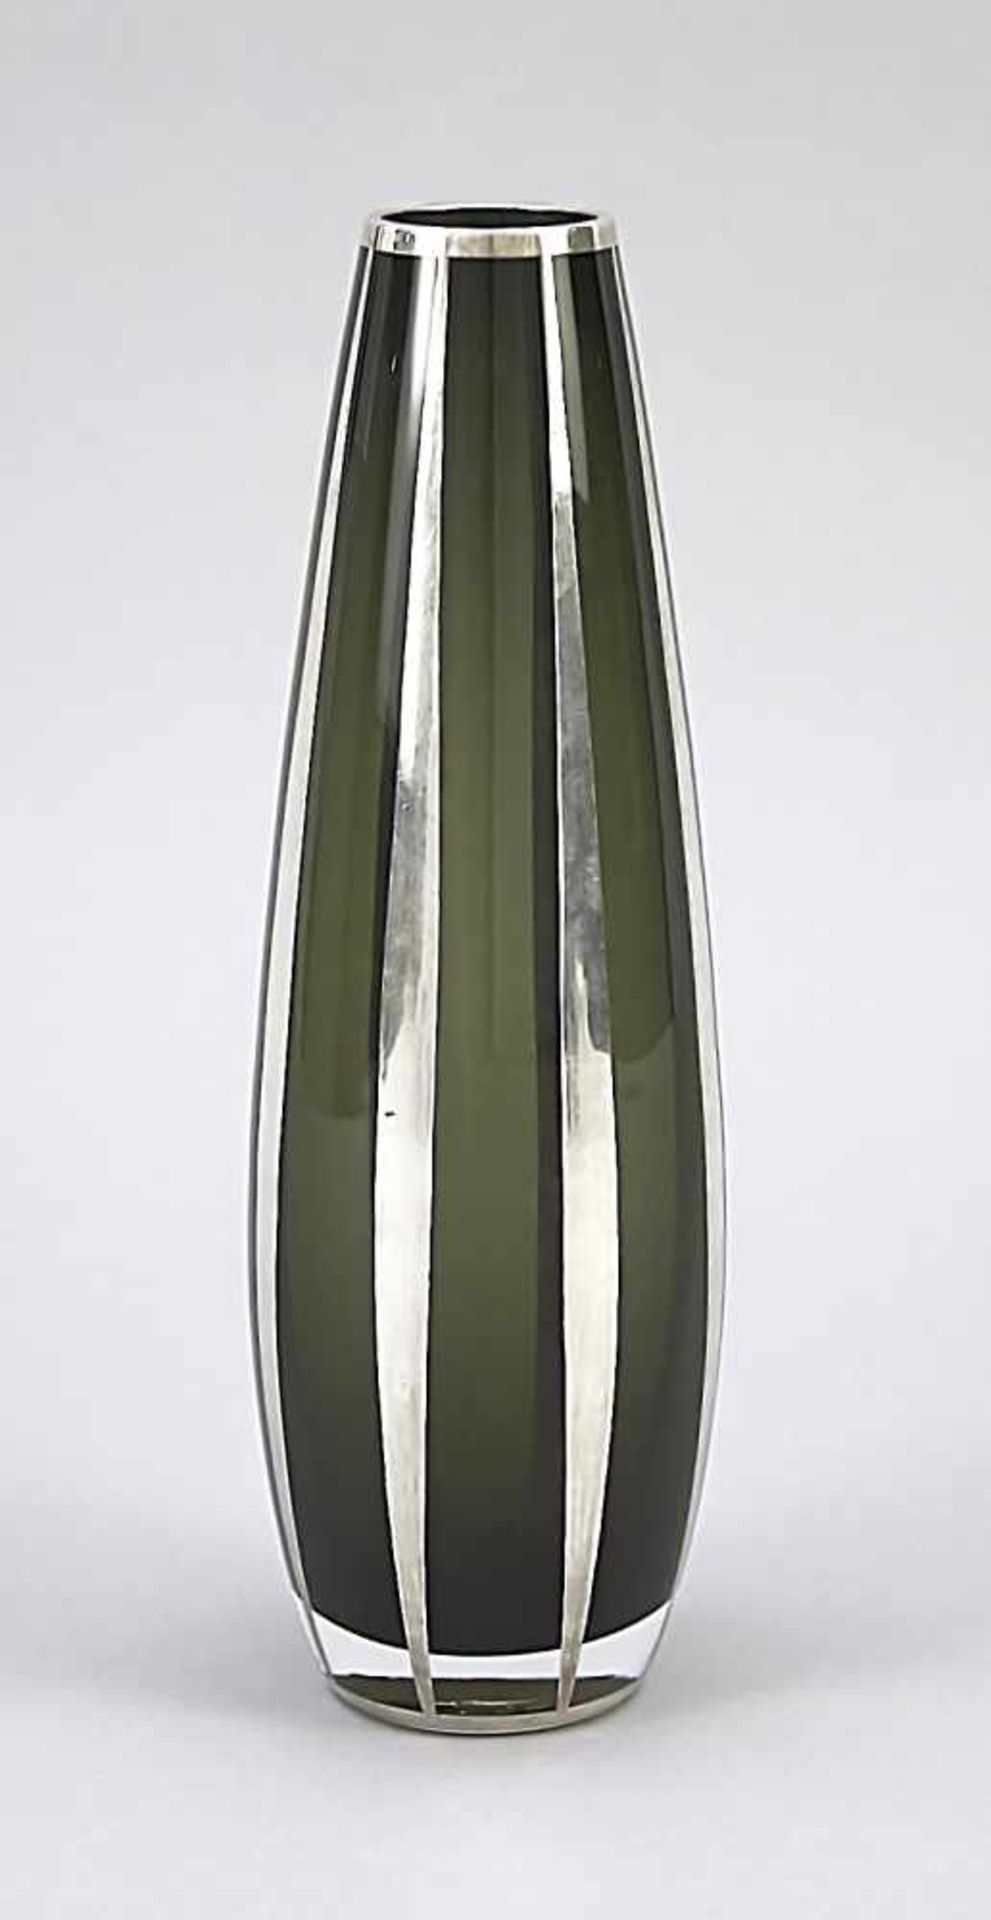 Vase, 20th century, round base, slender, slightly bulgy form, green glass with silver